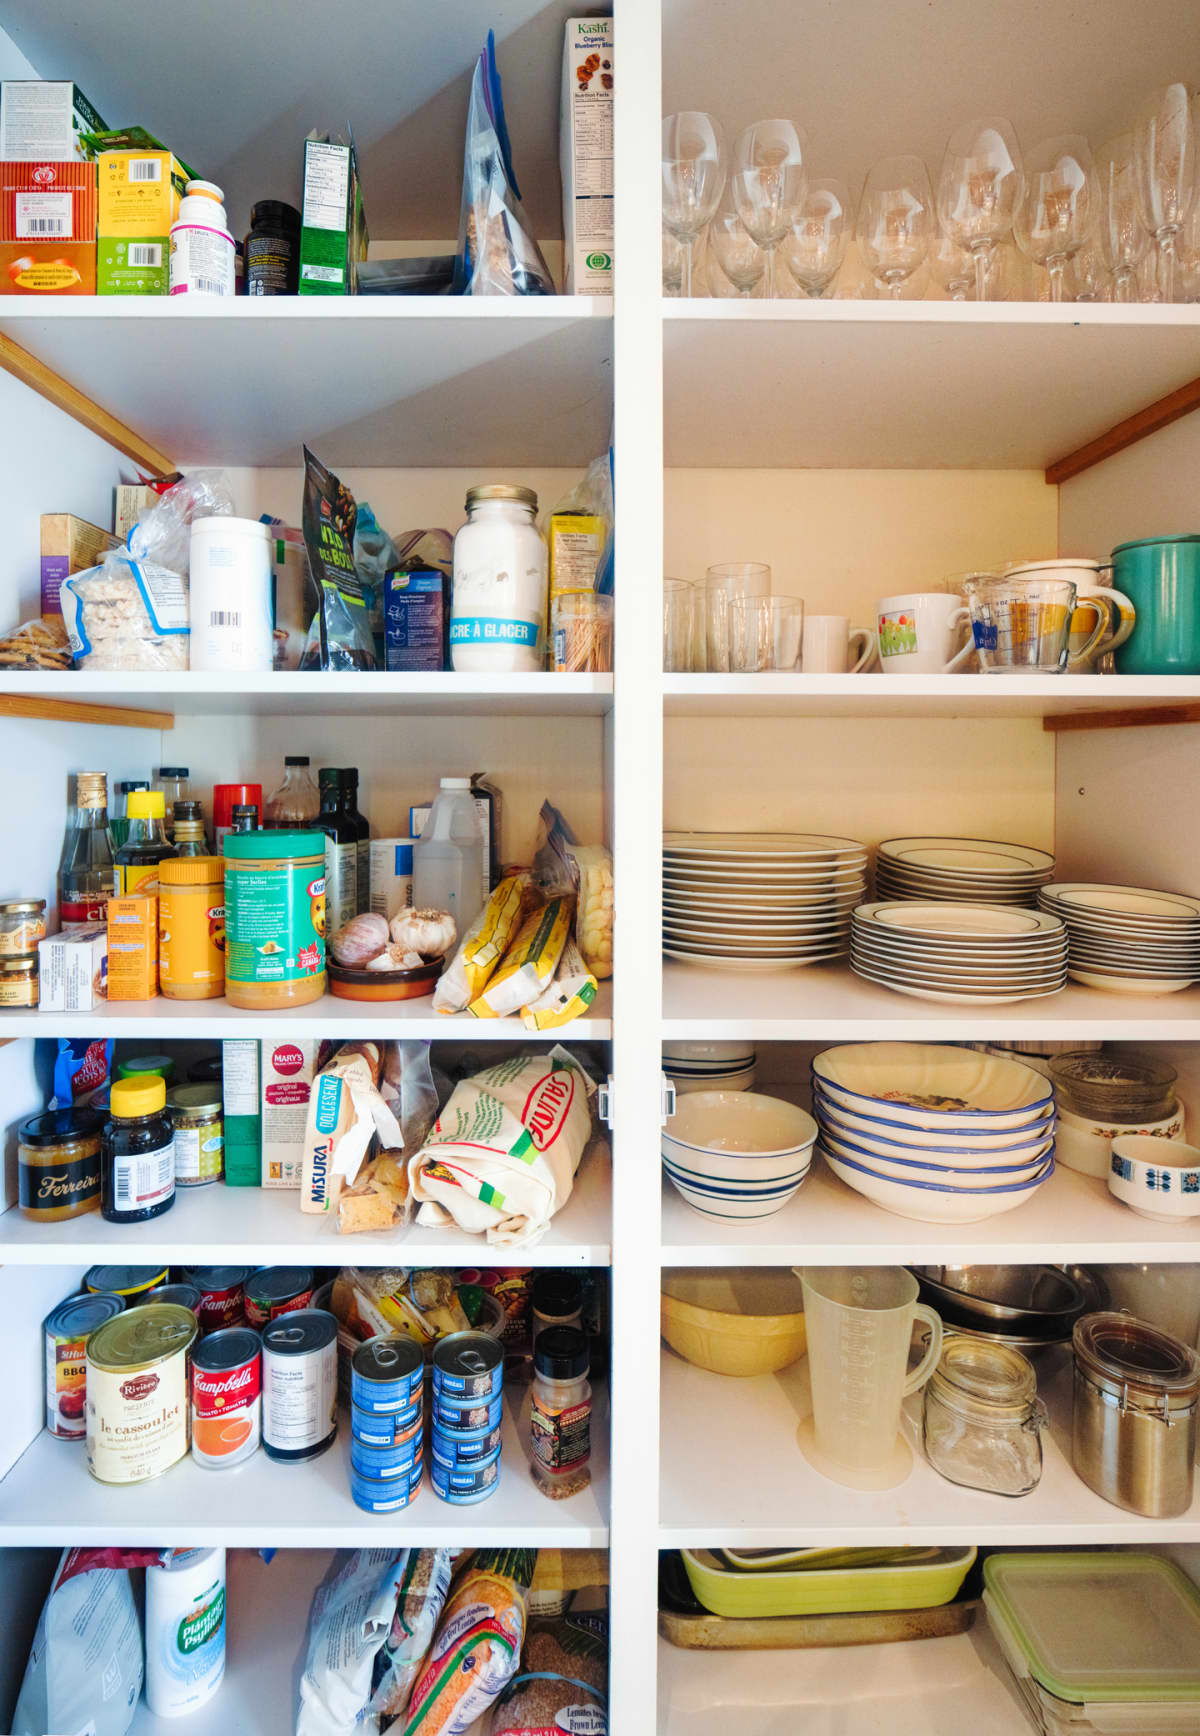 This photograph of a lived-in Apartment's Kitchen Pantry includes a section to the left for various food staples and to the right for dishes and crockery.